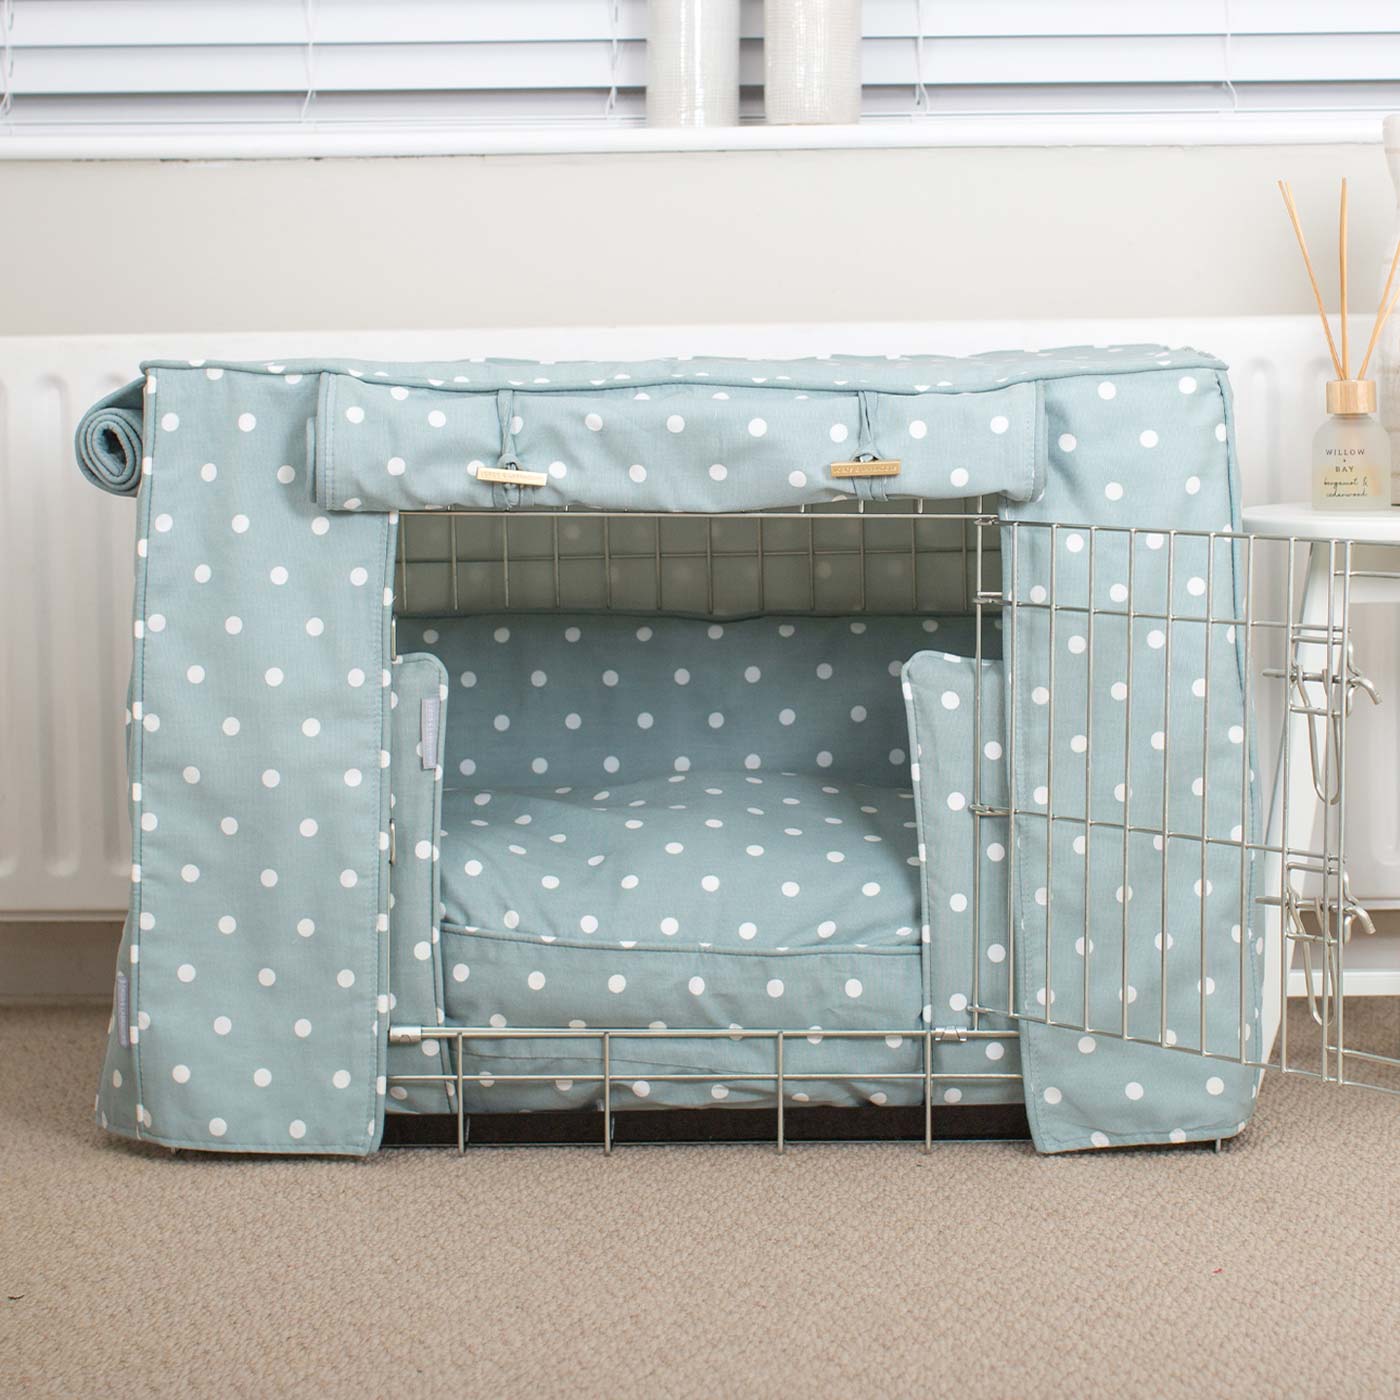 Luxury Heavy Duty Dog Crate, In Stunning Duck Egg Spot Crate Set, The Perfect Dog Crate Set For Building The Ultimate Pet Den! Dog Crate Cover Available To Personalise at Lords & Labradors 